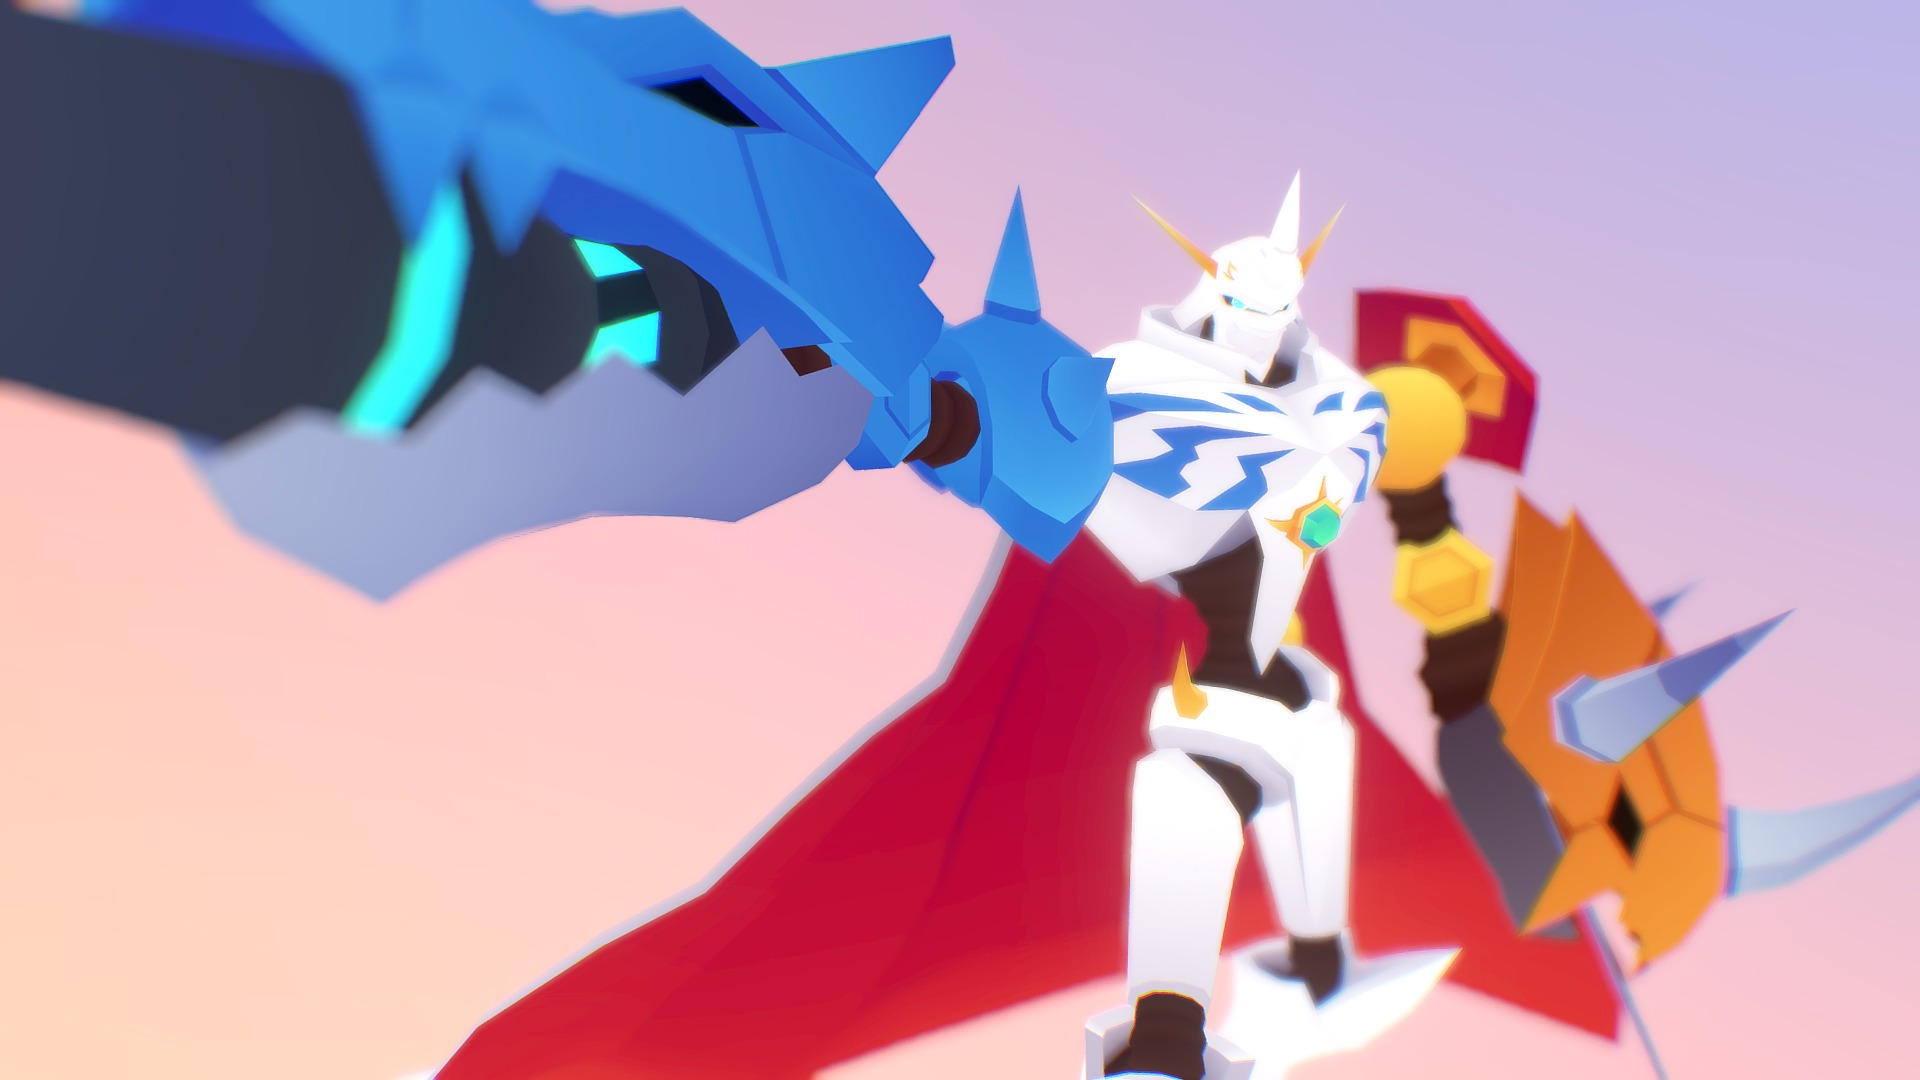 Omegamon X - Skill 2 Grey Sword [SLOW MOTION], #DigimonMastersOnline Omegamon  X - Skill 2 Grey Sword [SLOW MOTION], By Fontes95 DigiGaming